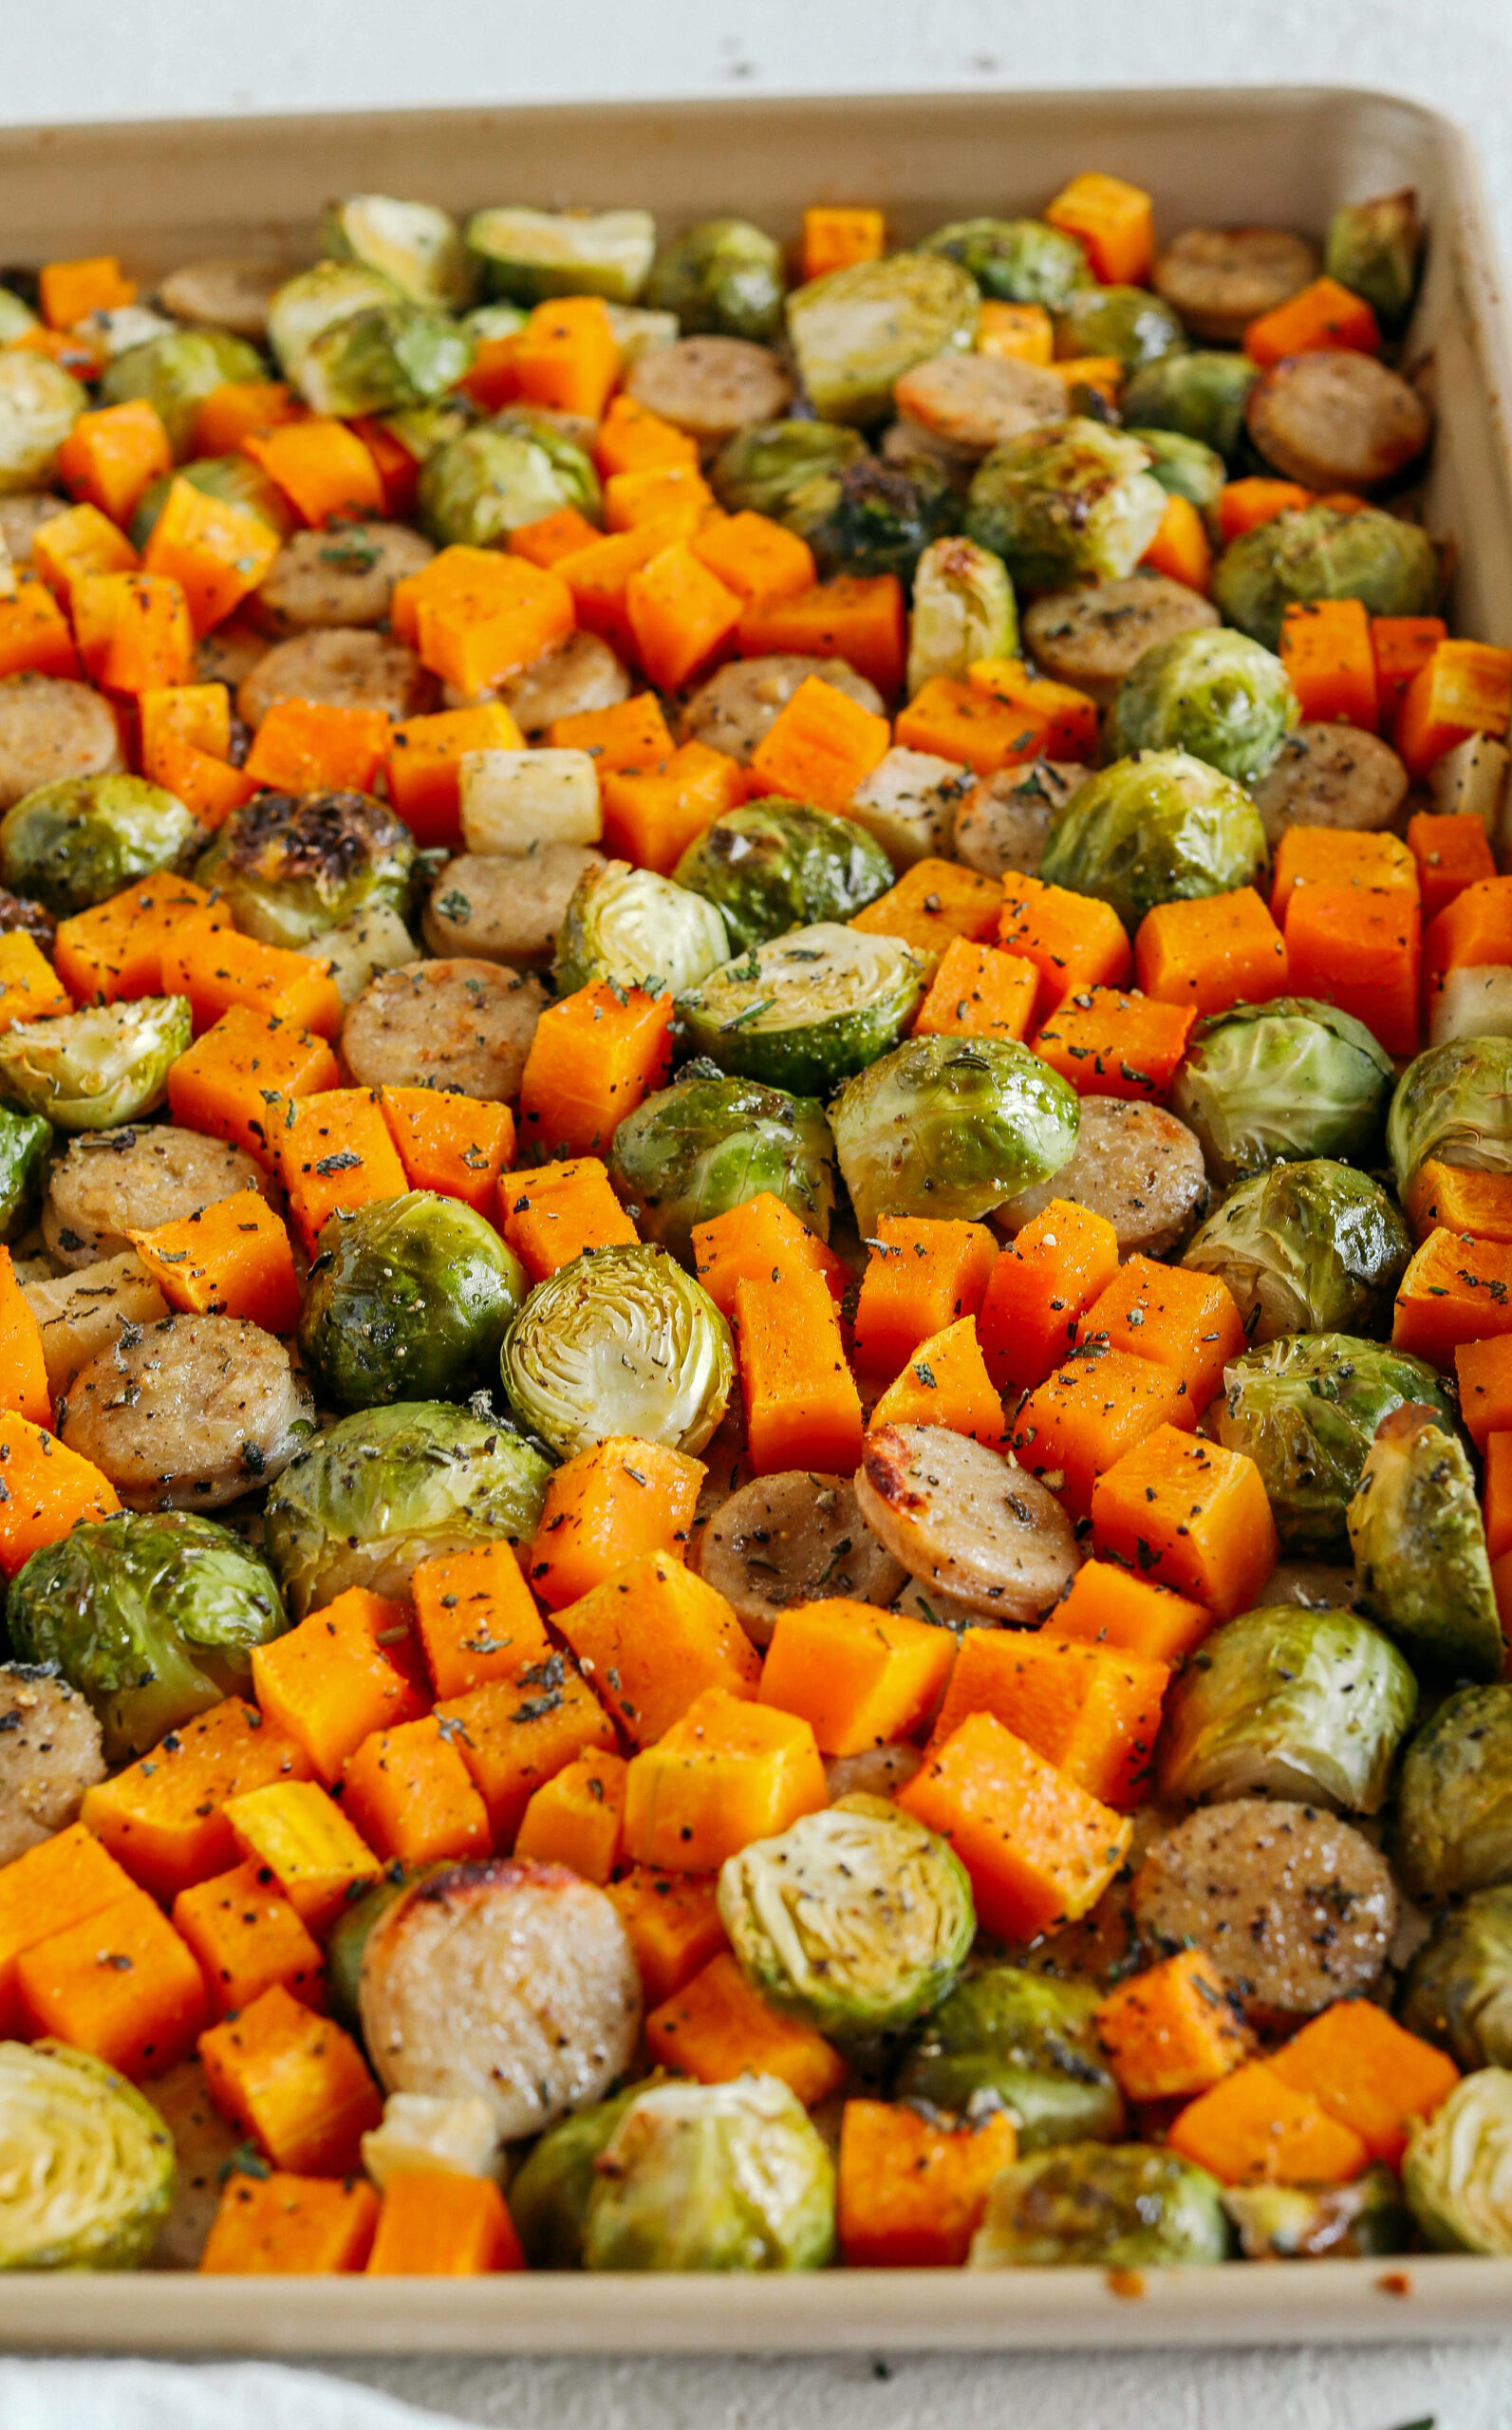 Harvest Sheet Pan Sausage and Veggies loaded with flavorful chicken sausage, butternut squash, brussels sprouts, and apples for a quick and easy dinner made in just 30 minutes!  Roasted in a maple mustard glaze and fresh herbs for the perfect fall meal!  